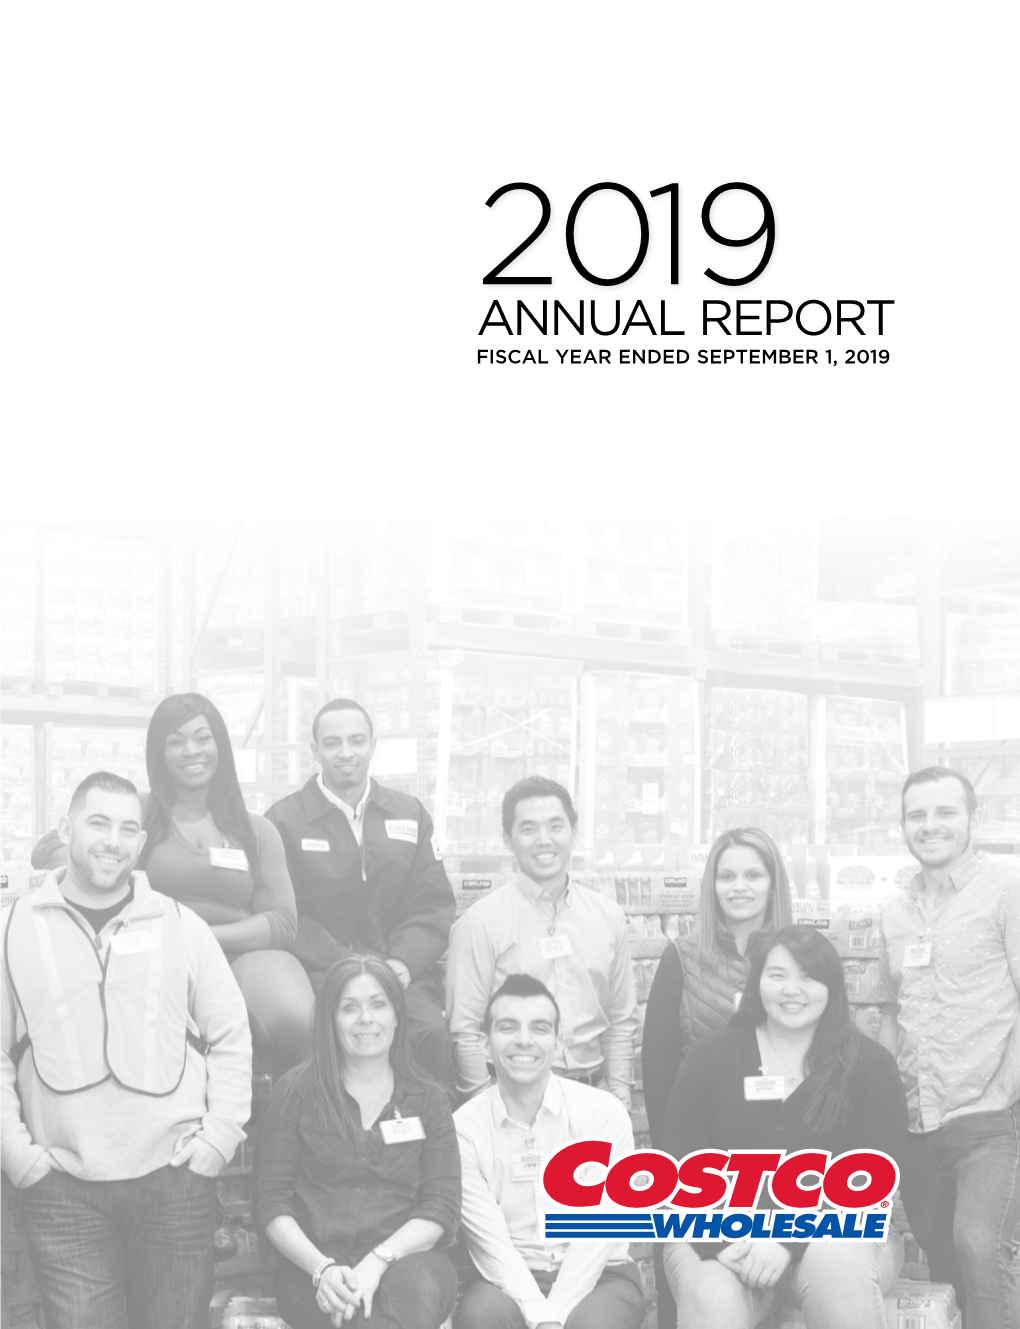 Annual Report Fiscal Year Ended September 1, 2019 Cor000075b 1119